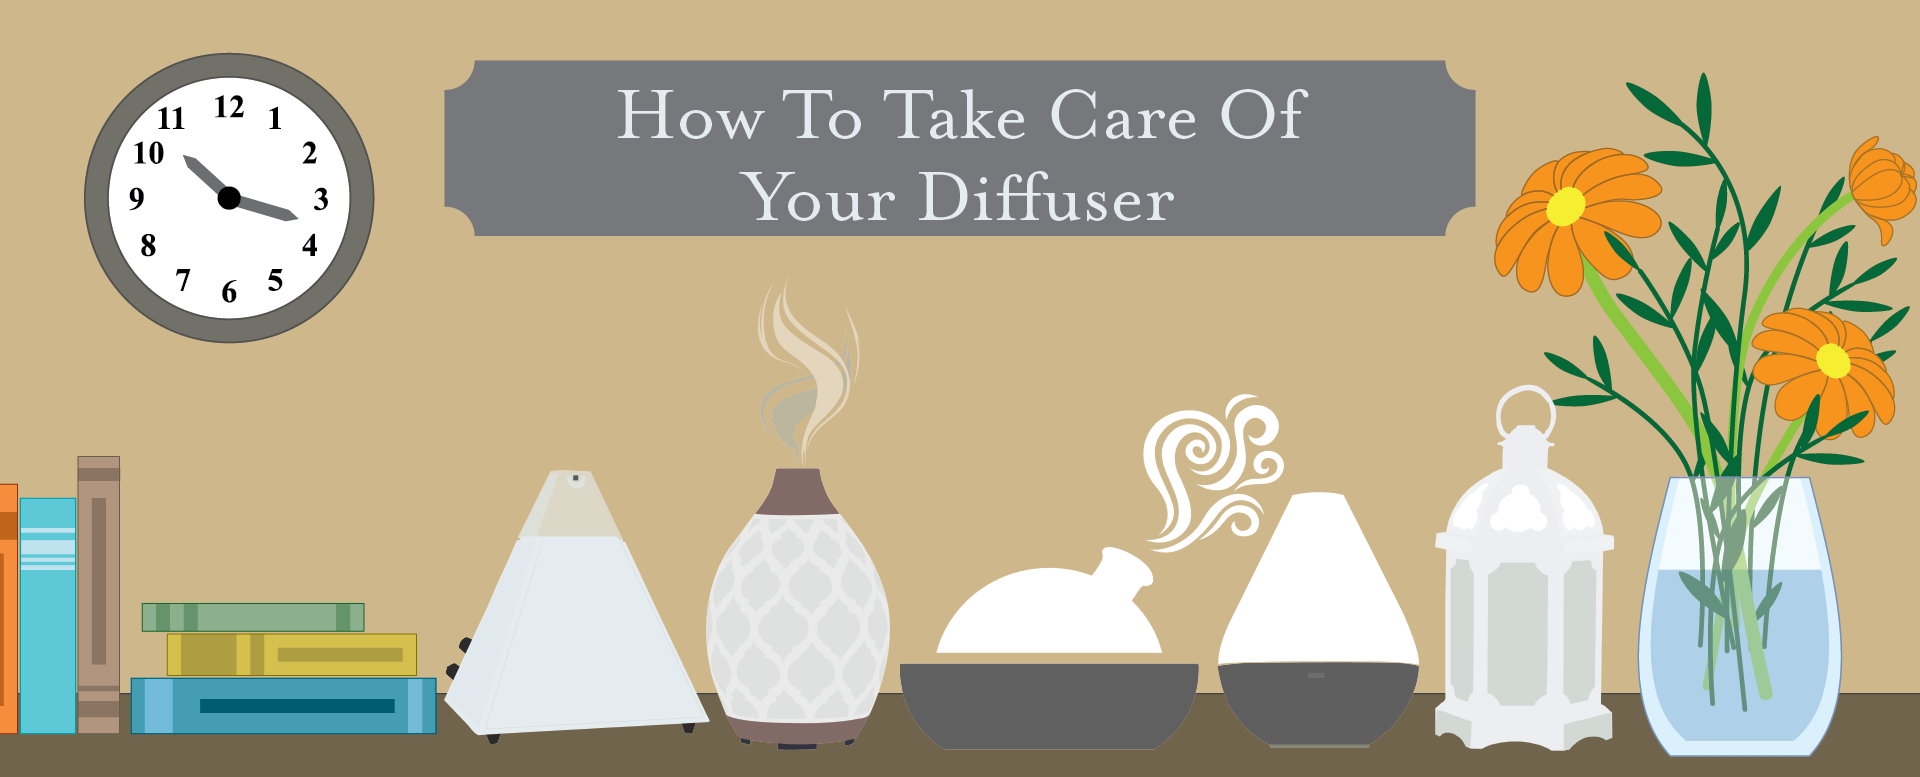 Graphical image of different type of diffuser with title "How to Take Care of Your Diffuser" on the image